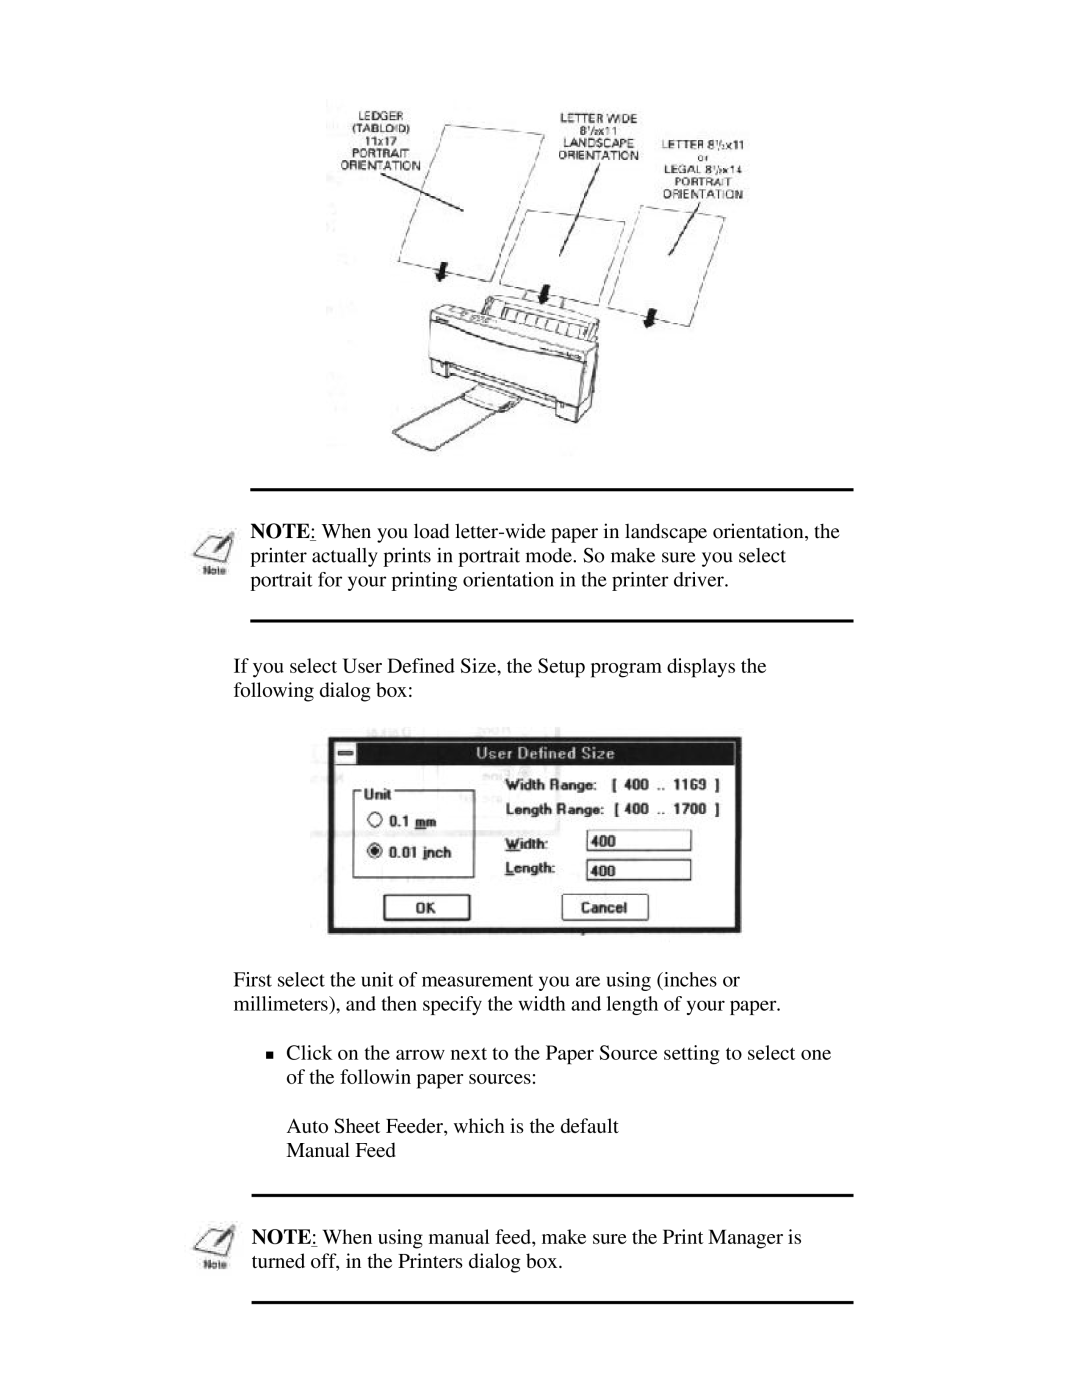 Canon BJ-230 user manual Auto Sheet Feeder, which is the default Manual Feed 